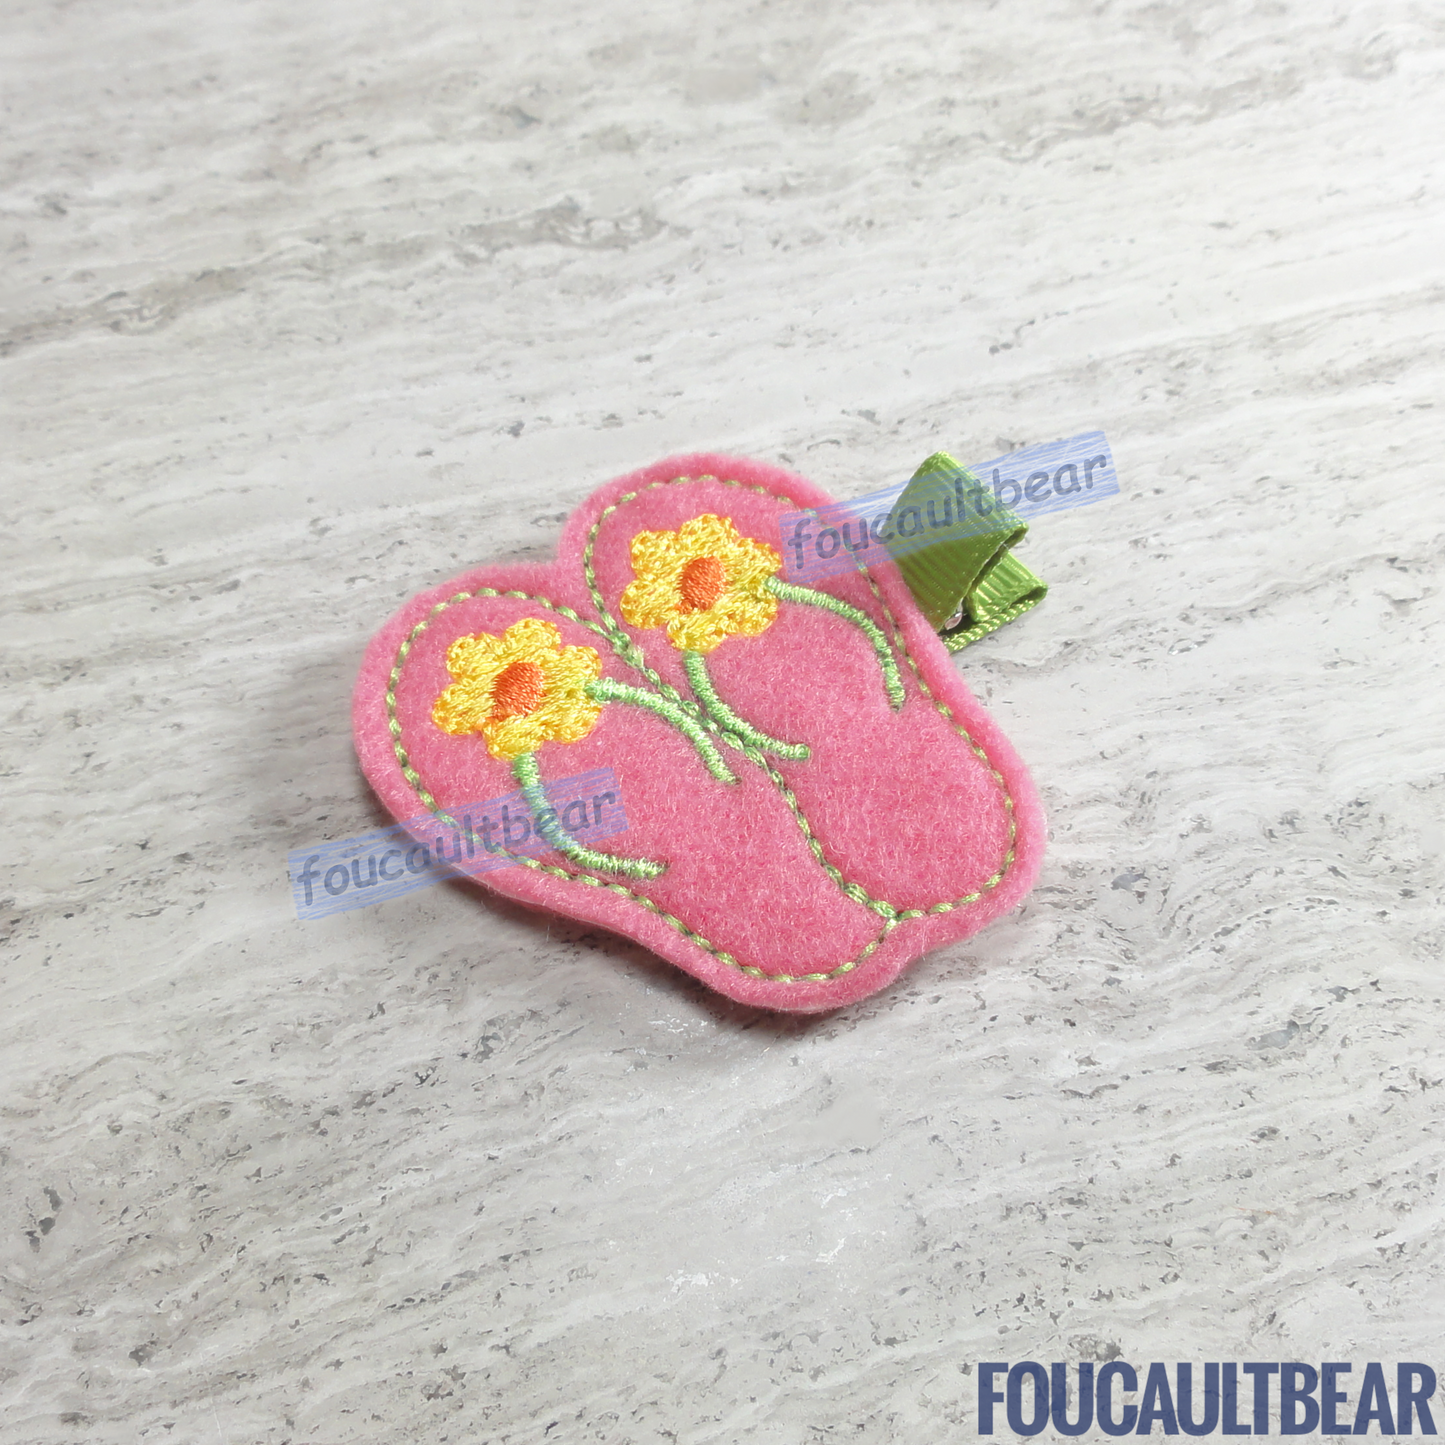 Foucaultbear's HANDMADE HAIR CLIPPIE. Summer Flip-Flops. Embroidered Soft Felt Centerpiece. Partially Lined Alligator Hair Clip. Summer Flip-Flop Thong Sandals Hair Clippie. Perfect for toddlers, preschoolers, elementary-schoolers. Absolutely adorable on babies with enough hair to wear it too. Makes for a great baby Shower gift. Definitely not your standard cliché shower gift. 